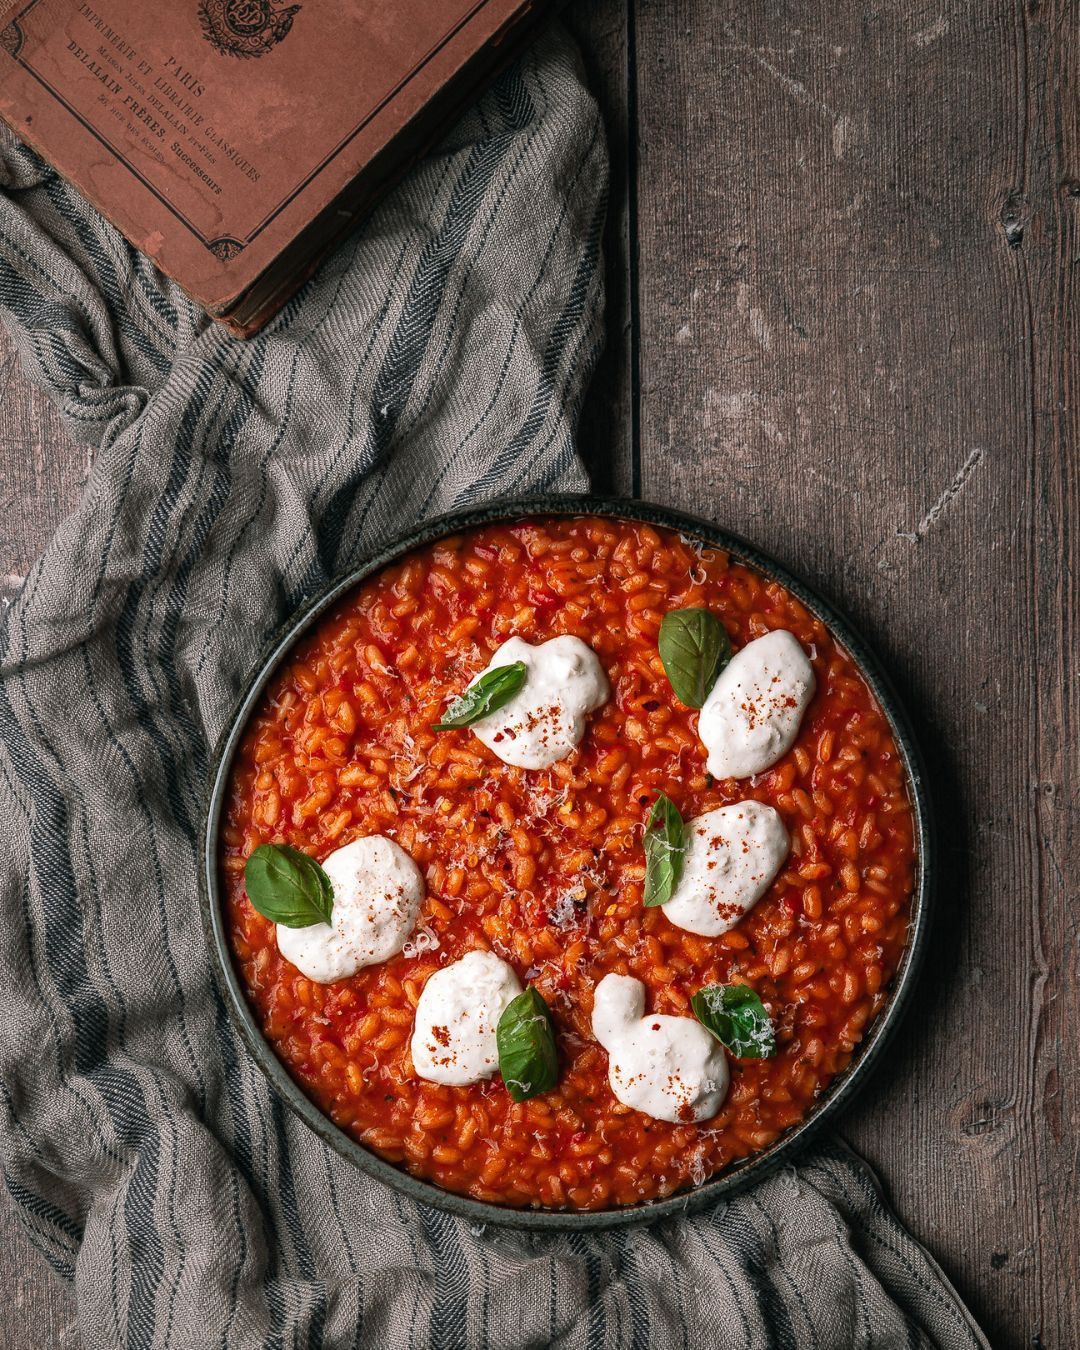 Risotto with pointed pepper & burrata 😍🌶️